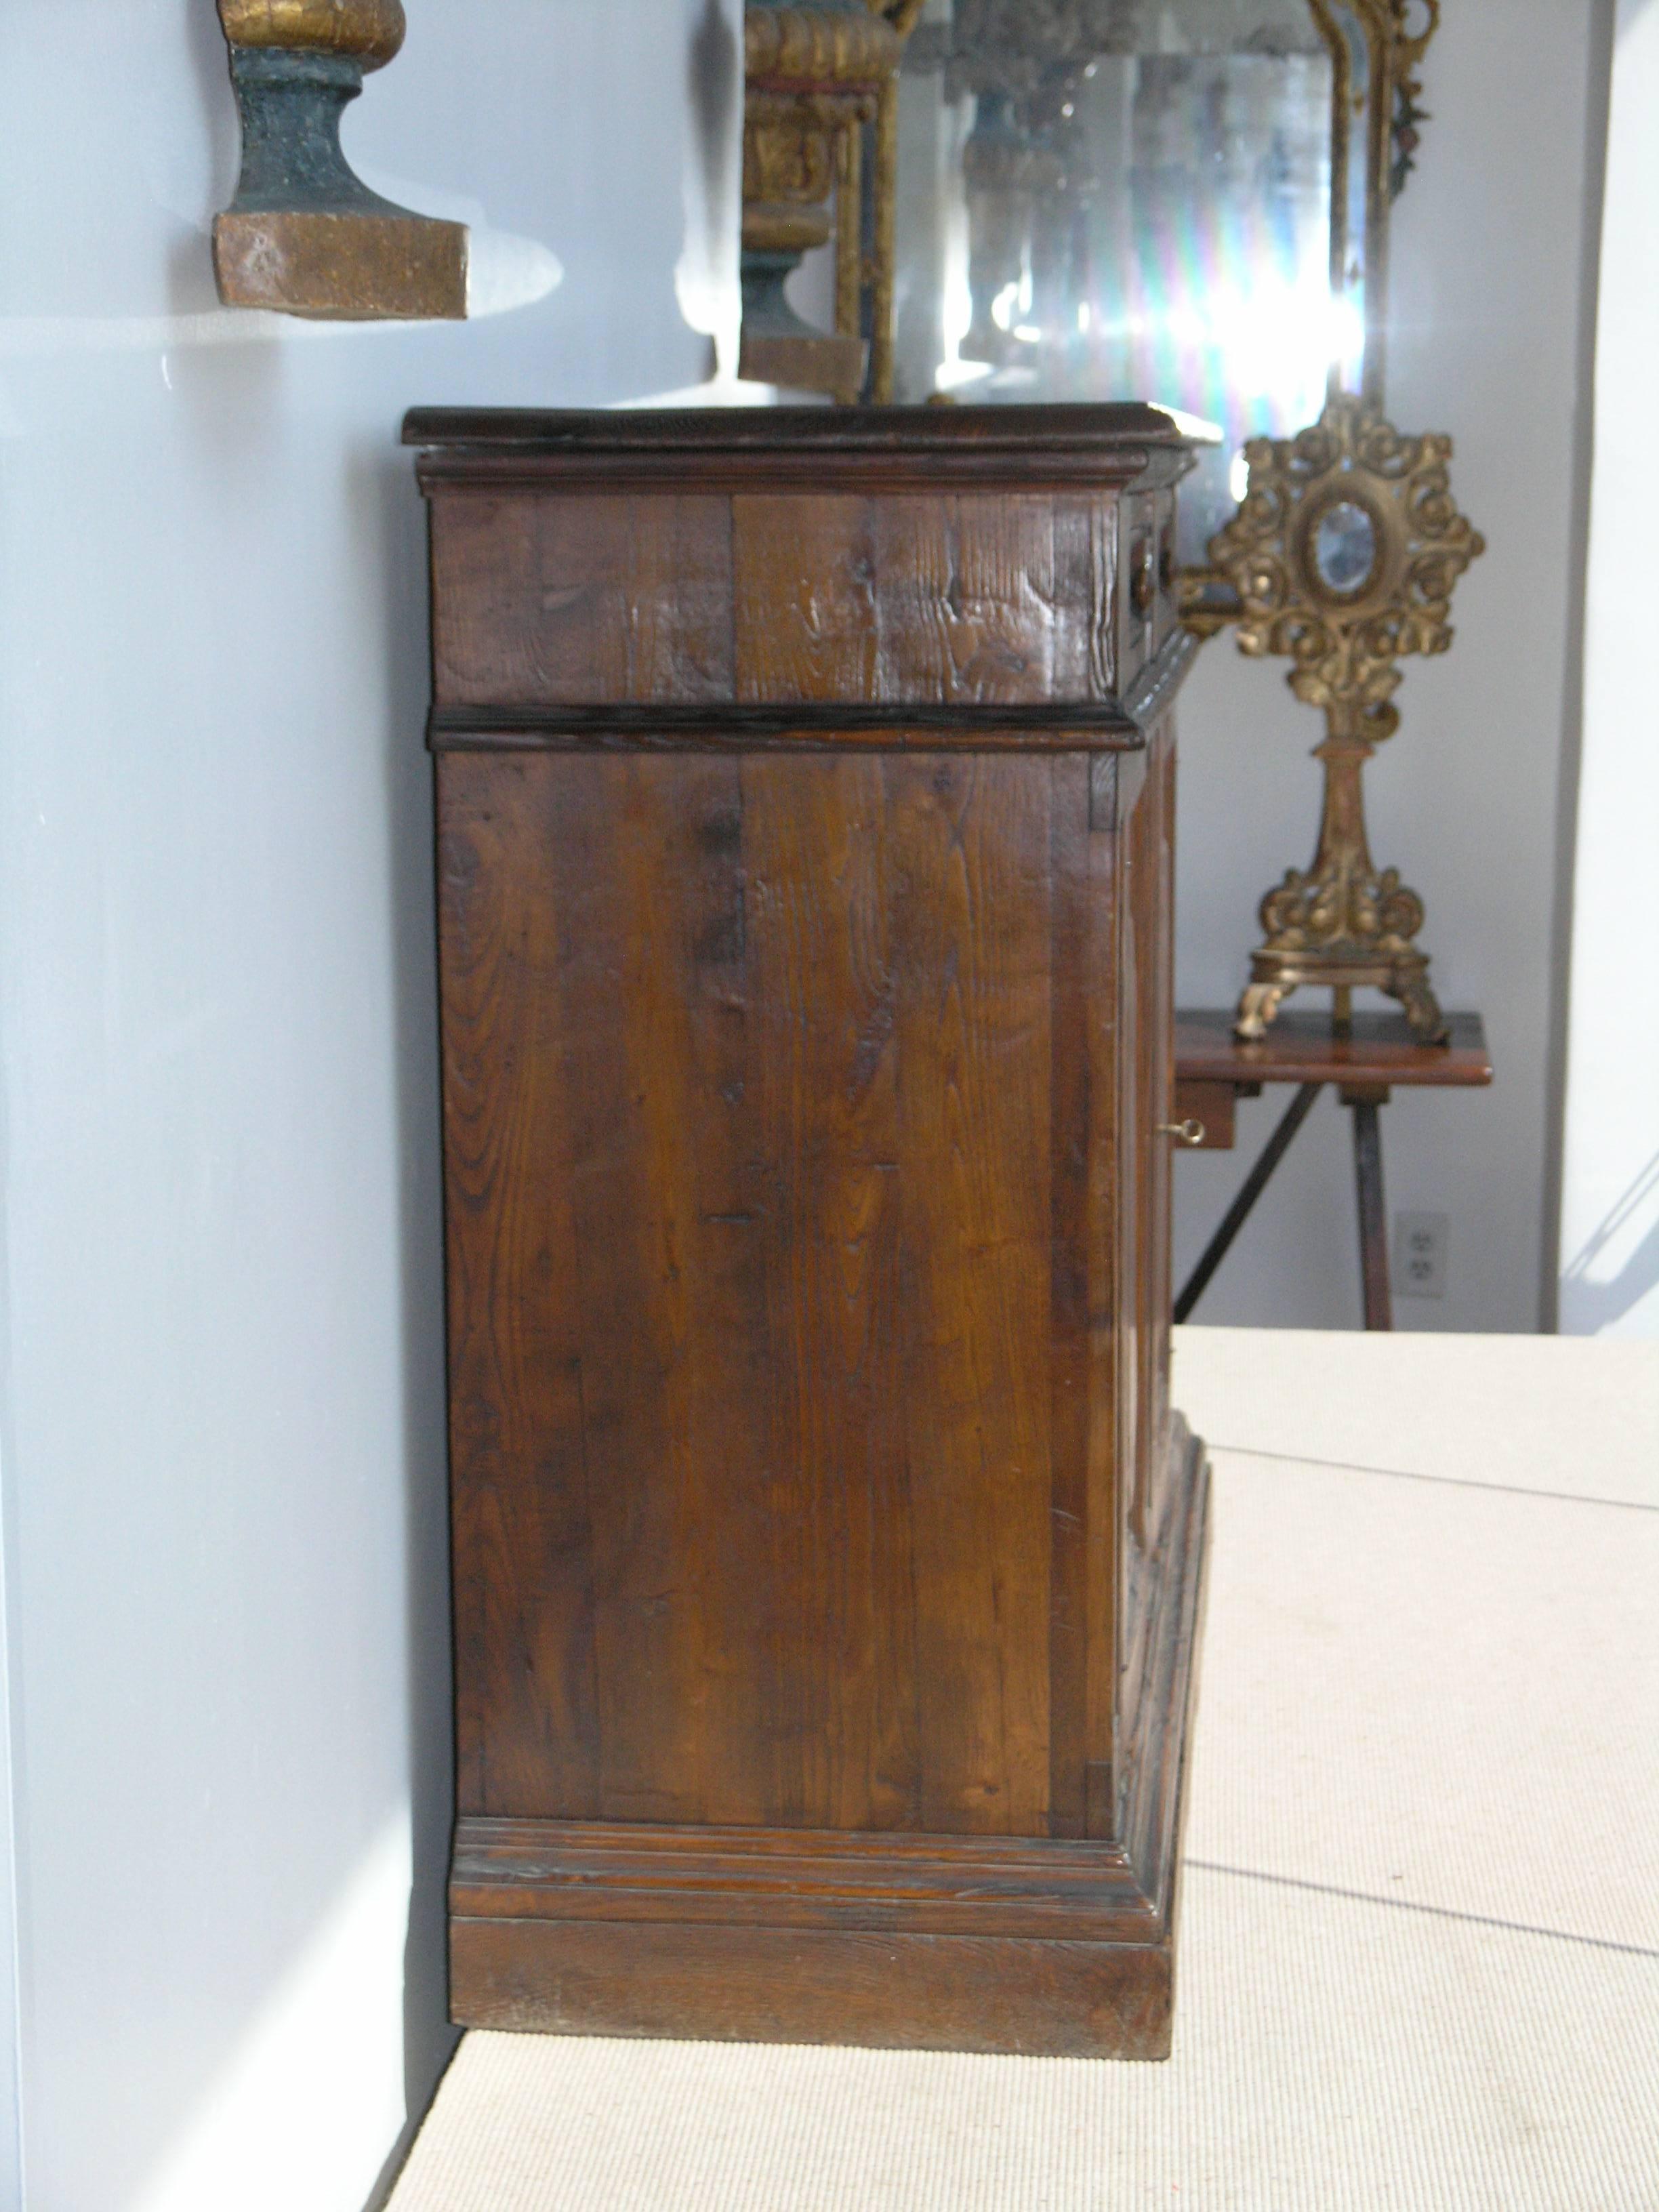 Rectangular top with molded edge over two drawers above two paneled doors raised on plinth base.